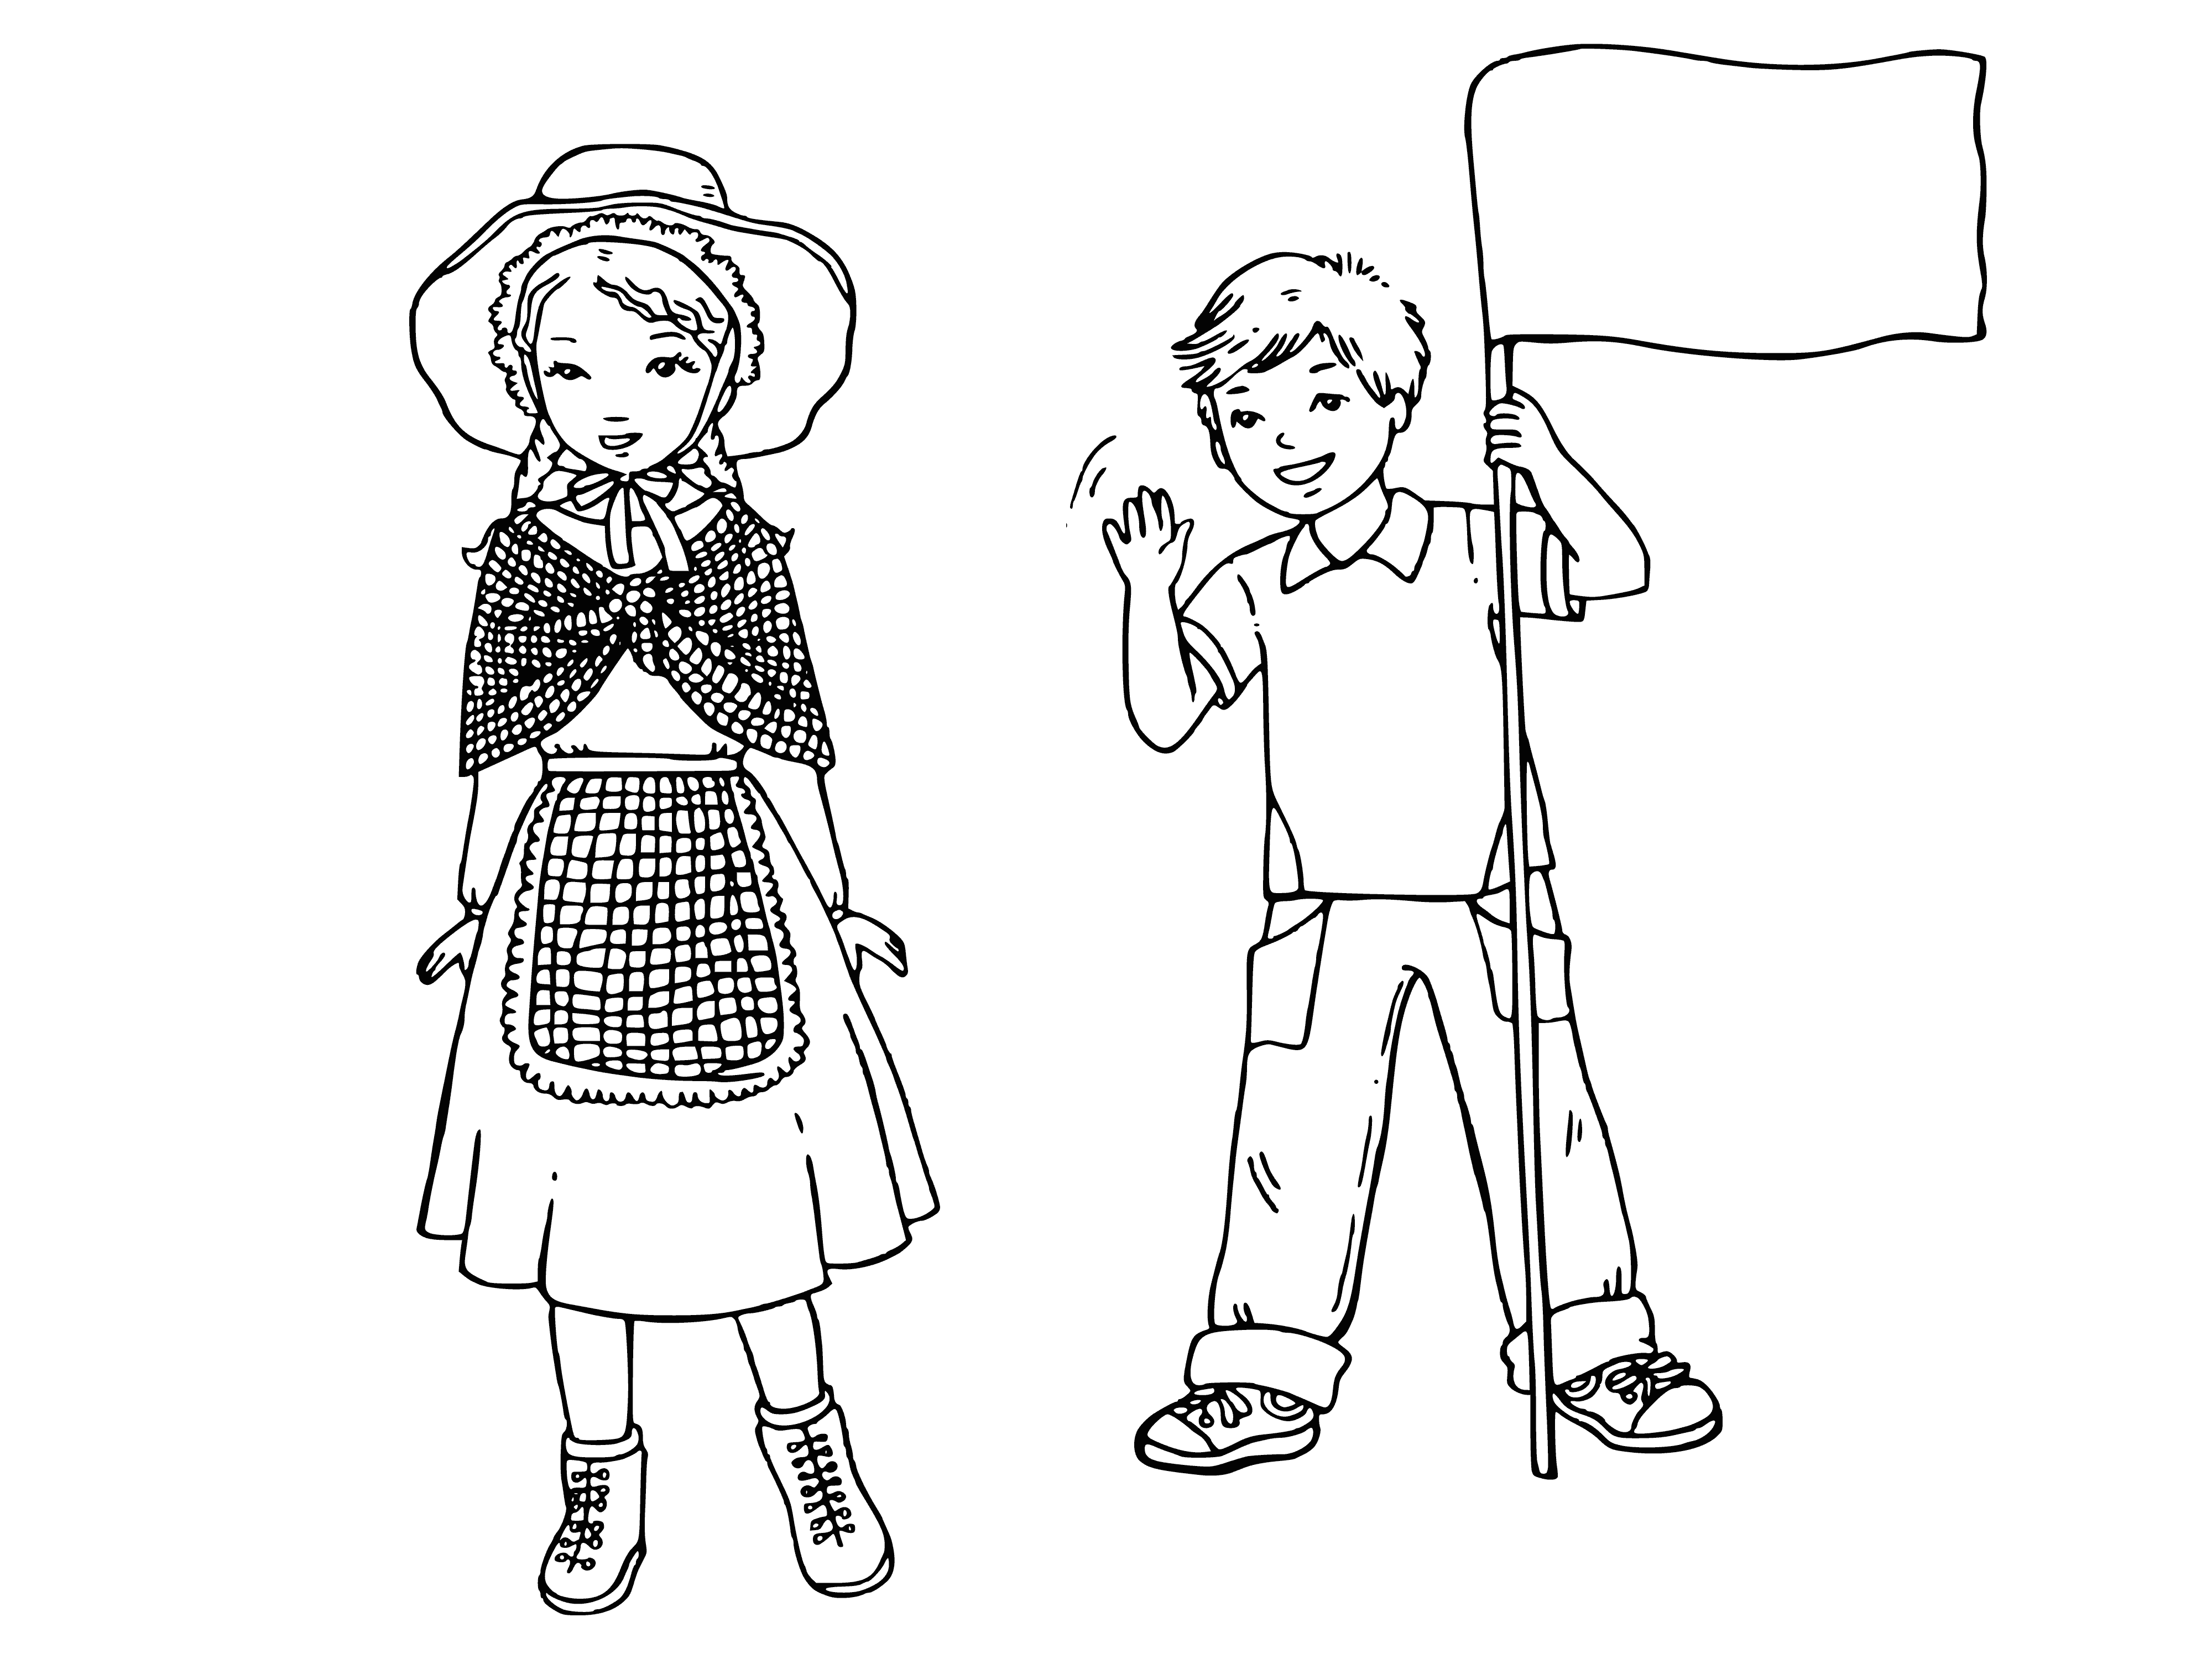 coloring page: Boy & girl side-by-side wearing traditional English attire: boy-brown suit/white shirt/red tie, girl-red dress/white collar/black belt, black shoes.